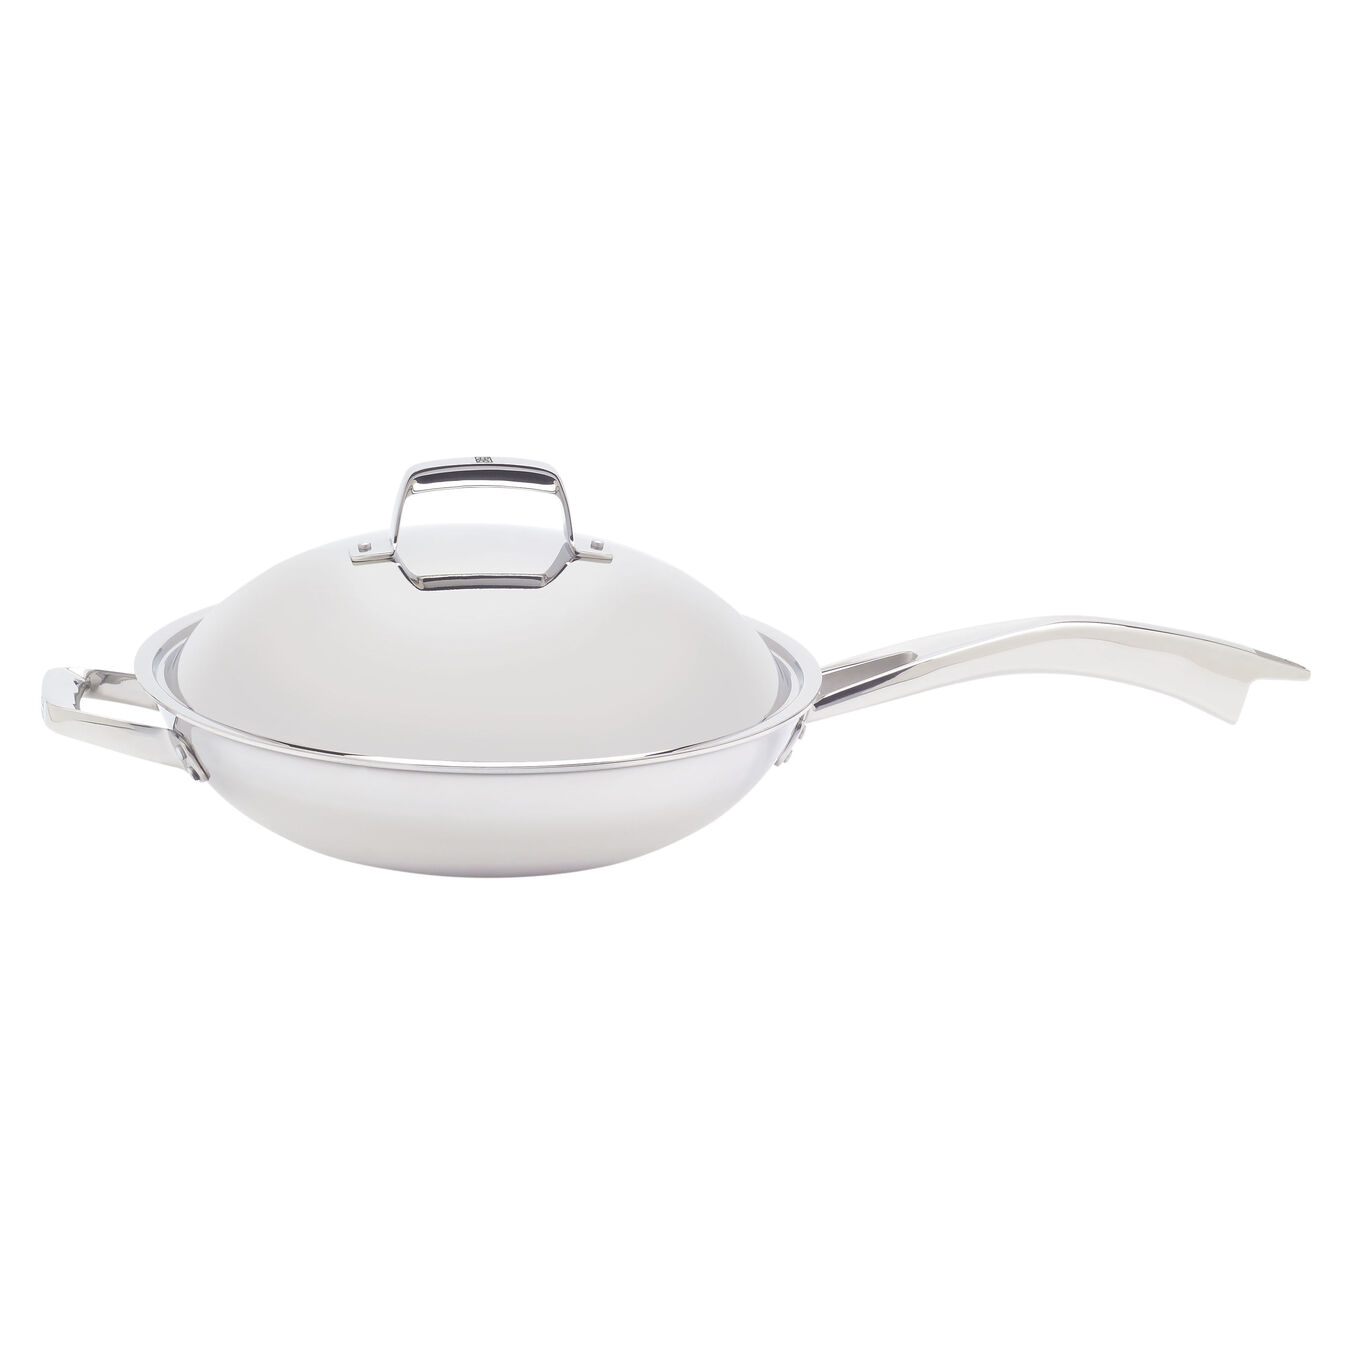 32 cm / 12.5 inch 18/10 Stainless Steel Wok with lid,,large 2